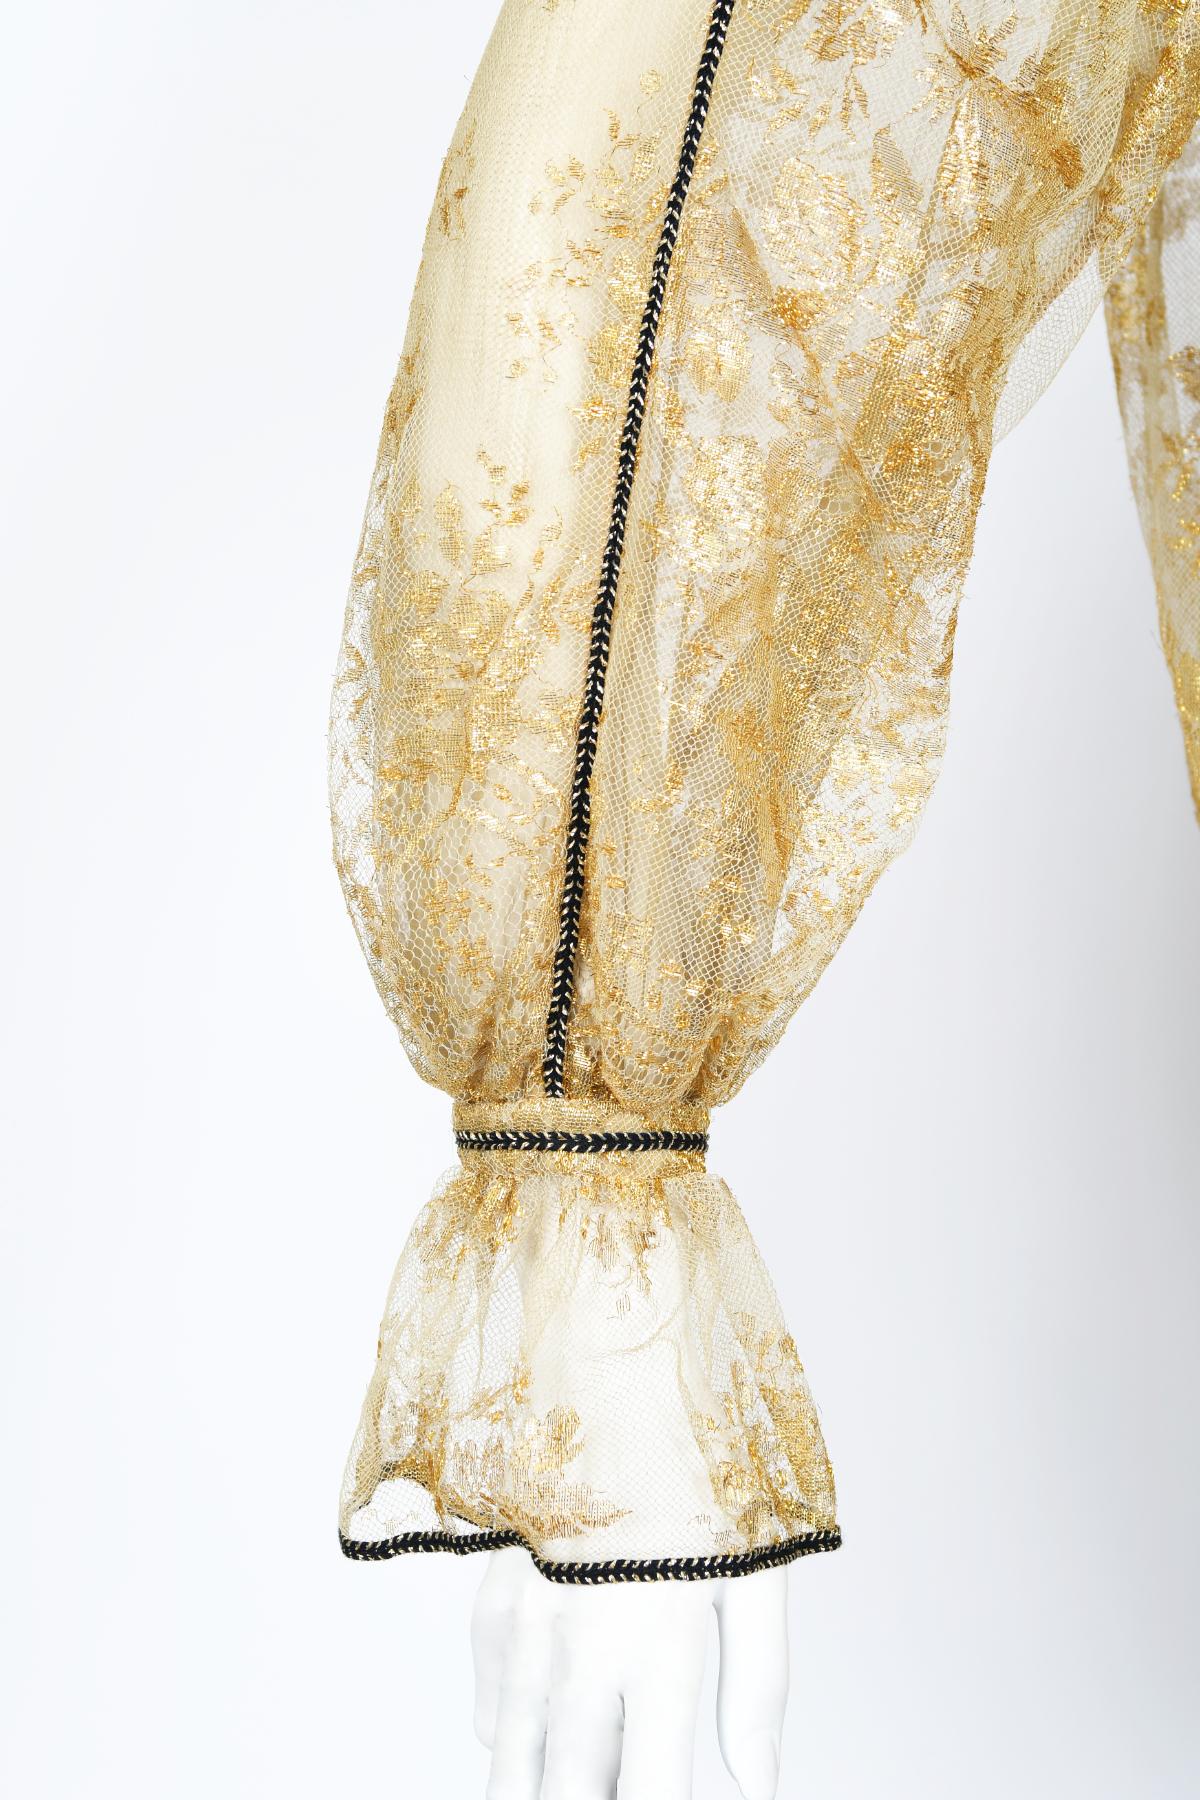 1970s Bill Gibb Couture Museum-Held Metallic Gold Sheer Lace Babydoll Mini Dress For Sale 6